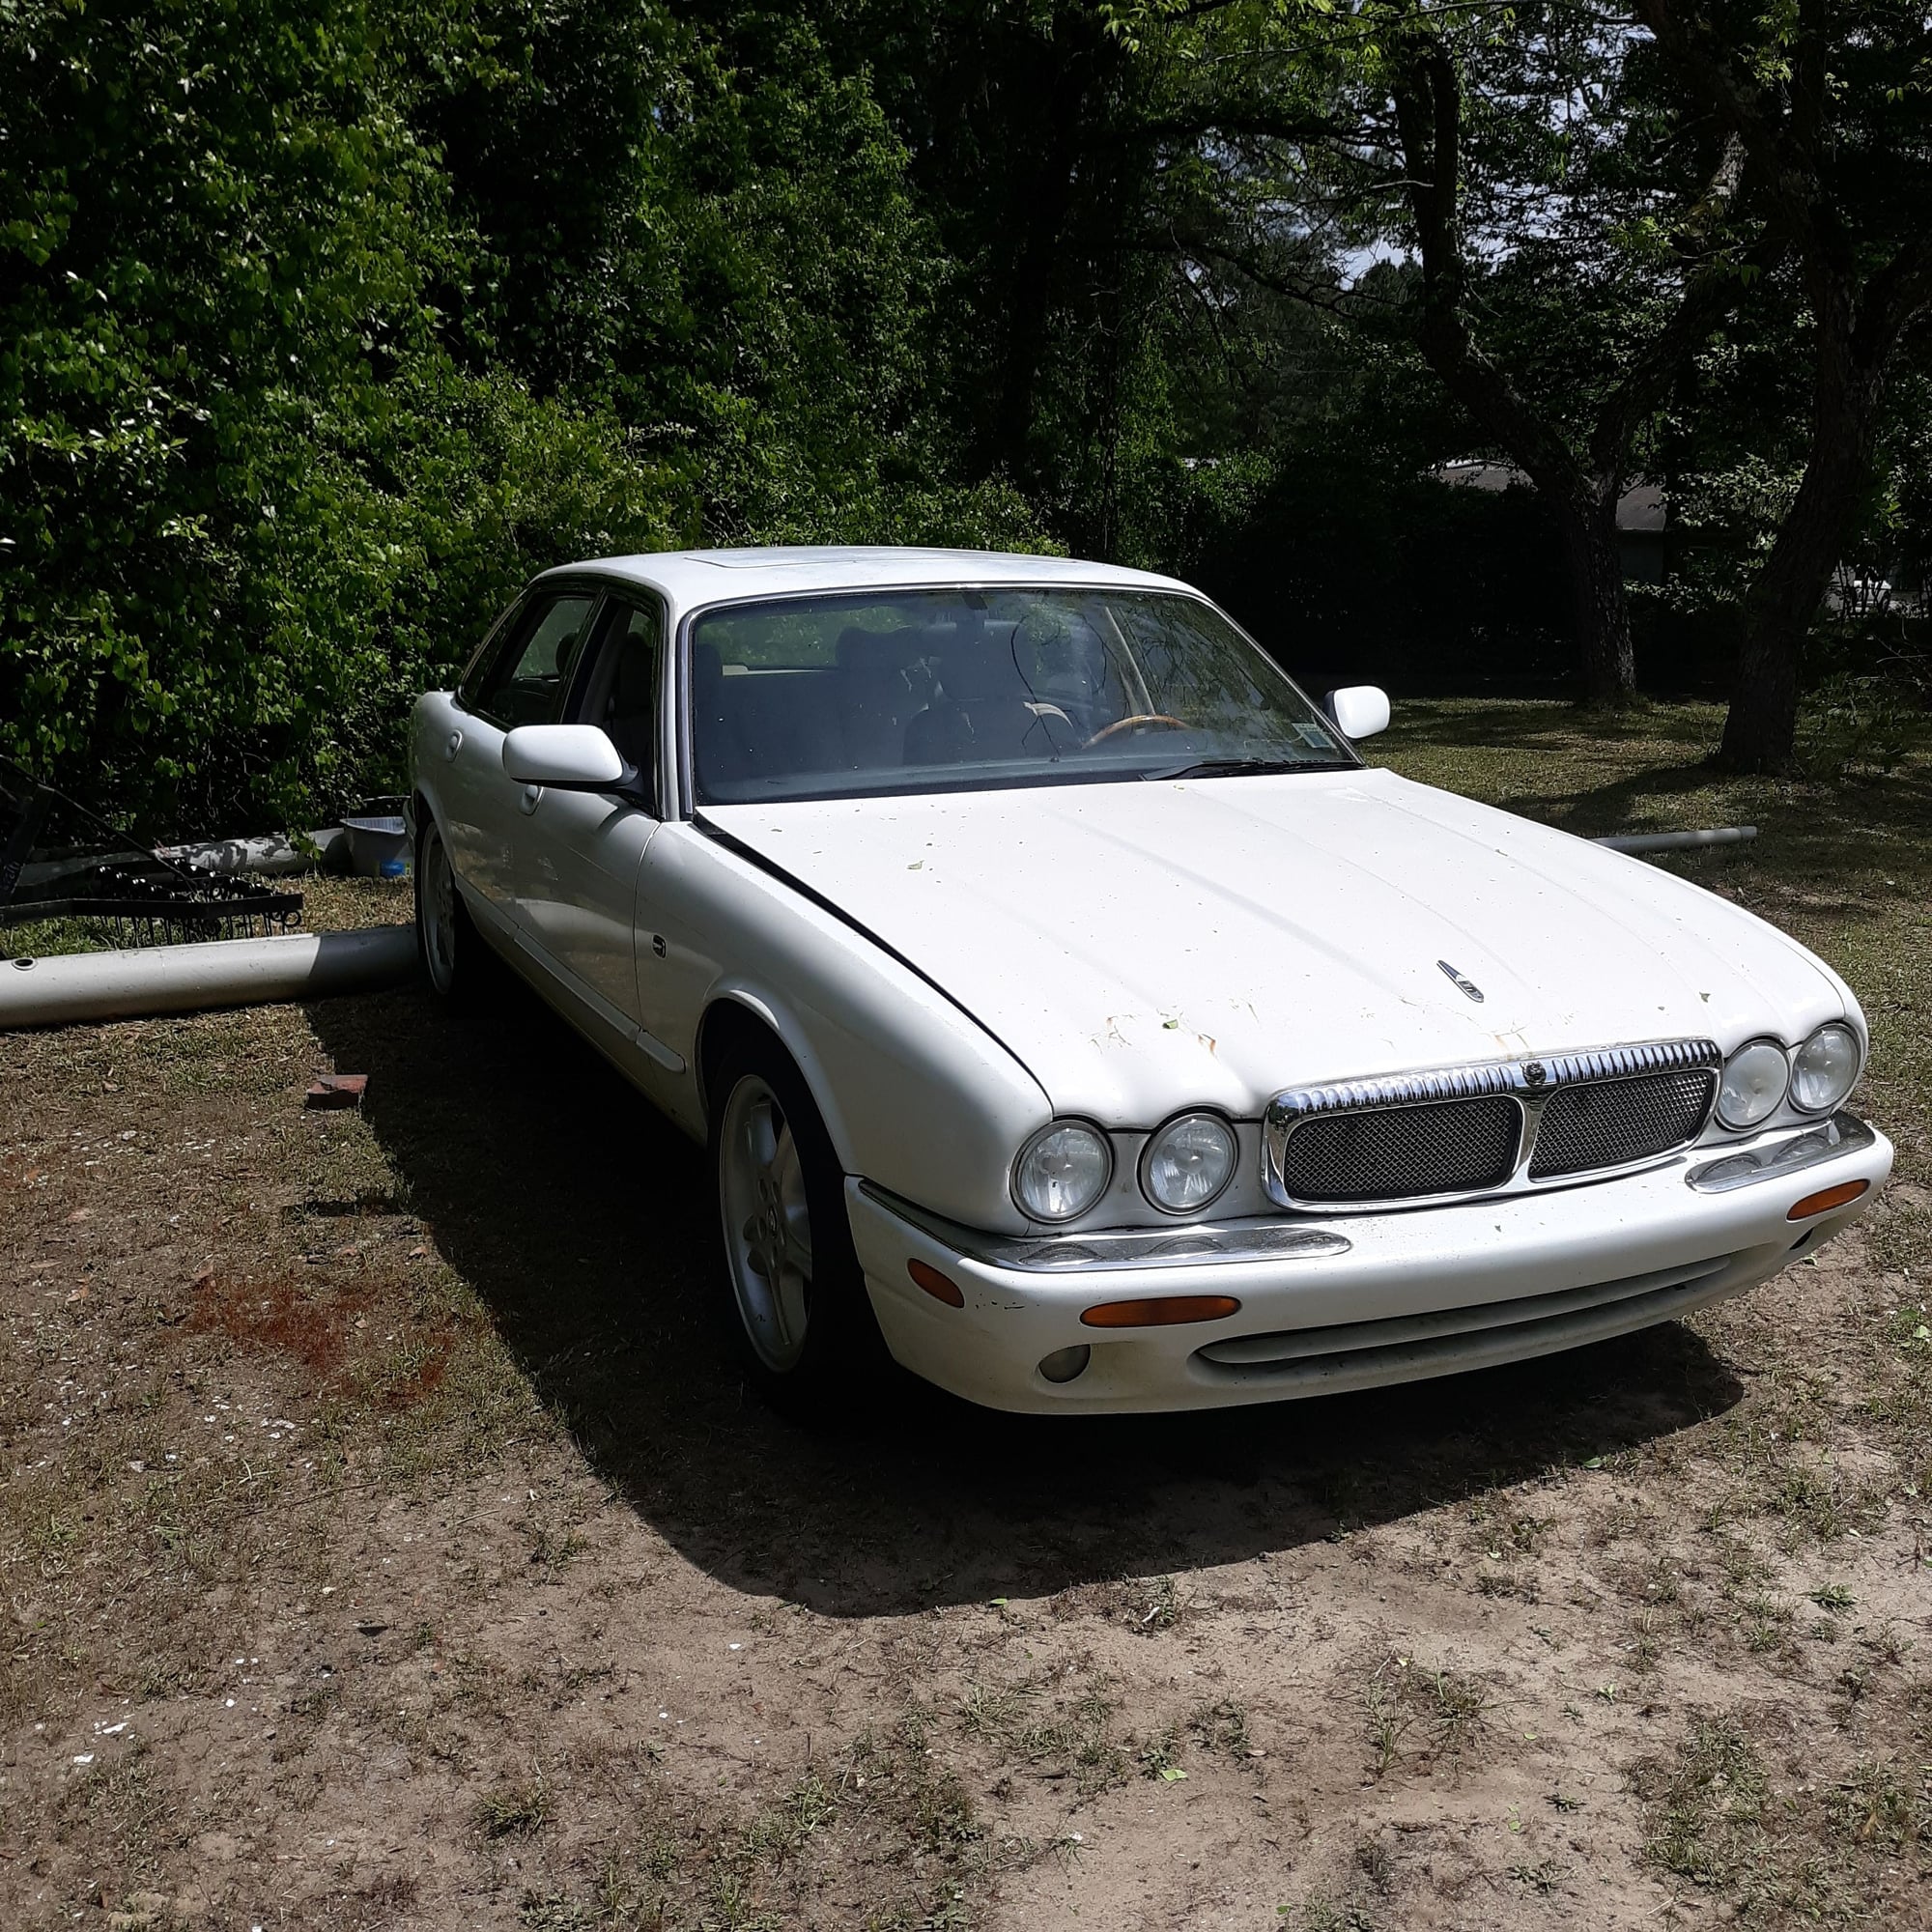 1998 Jaguar XJR - Everything - Miscellaneous - $1 - Fayetteville, NC 28306, United States